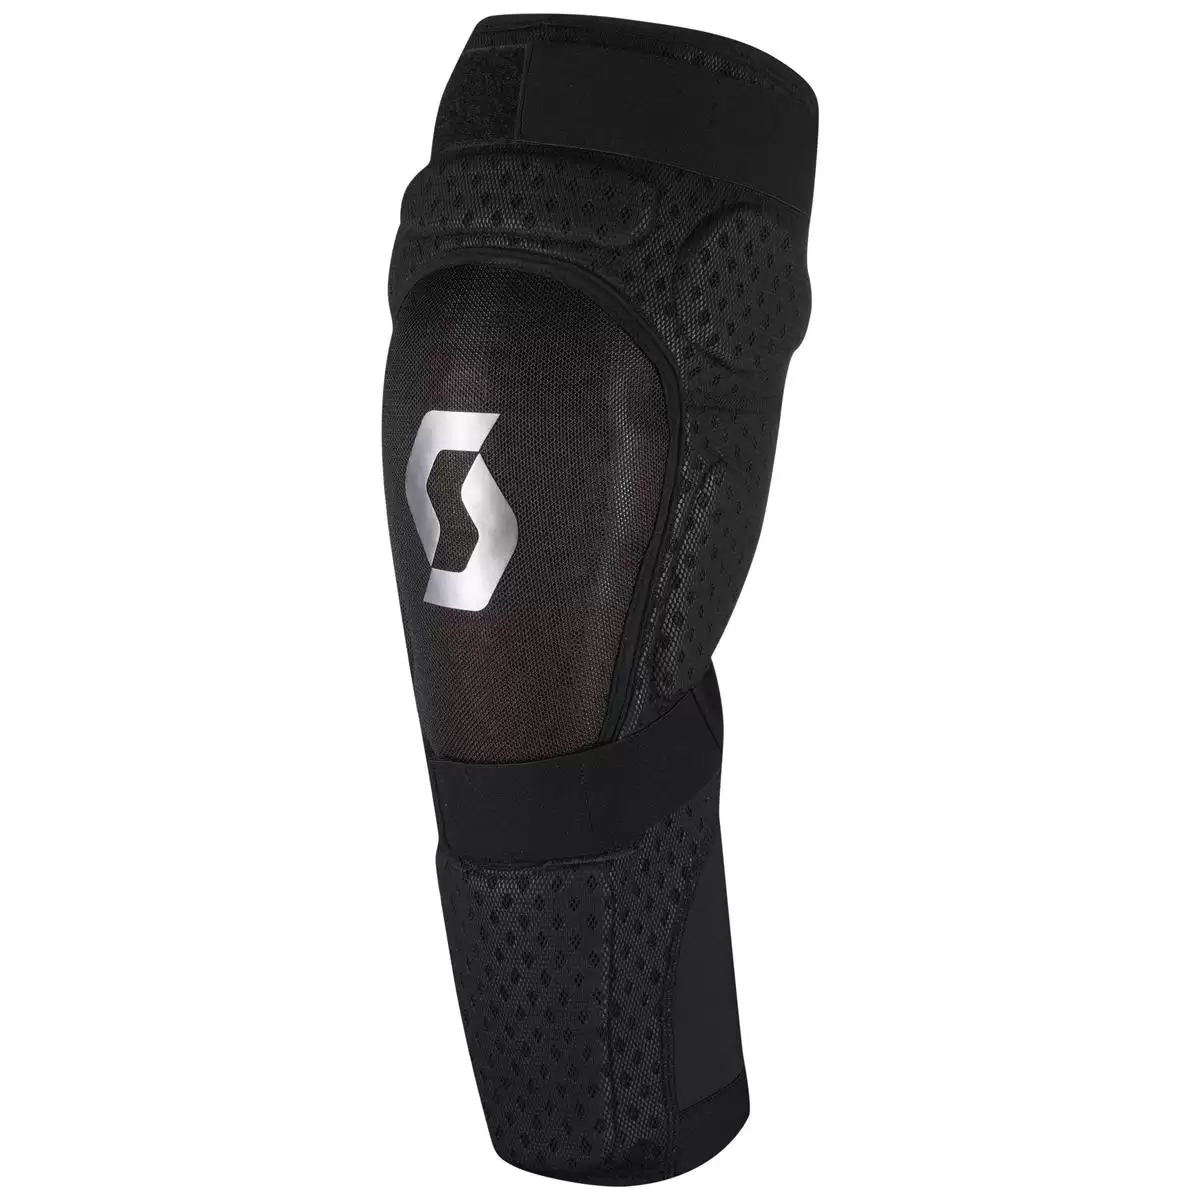 Knee pads Softcon 2 Black/Grey - Size S - image